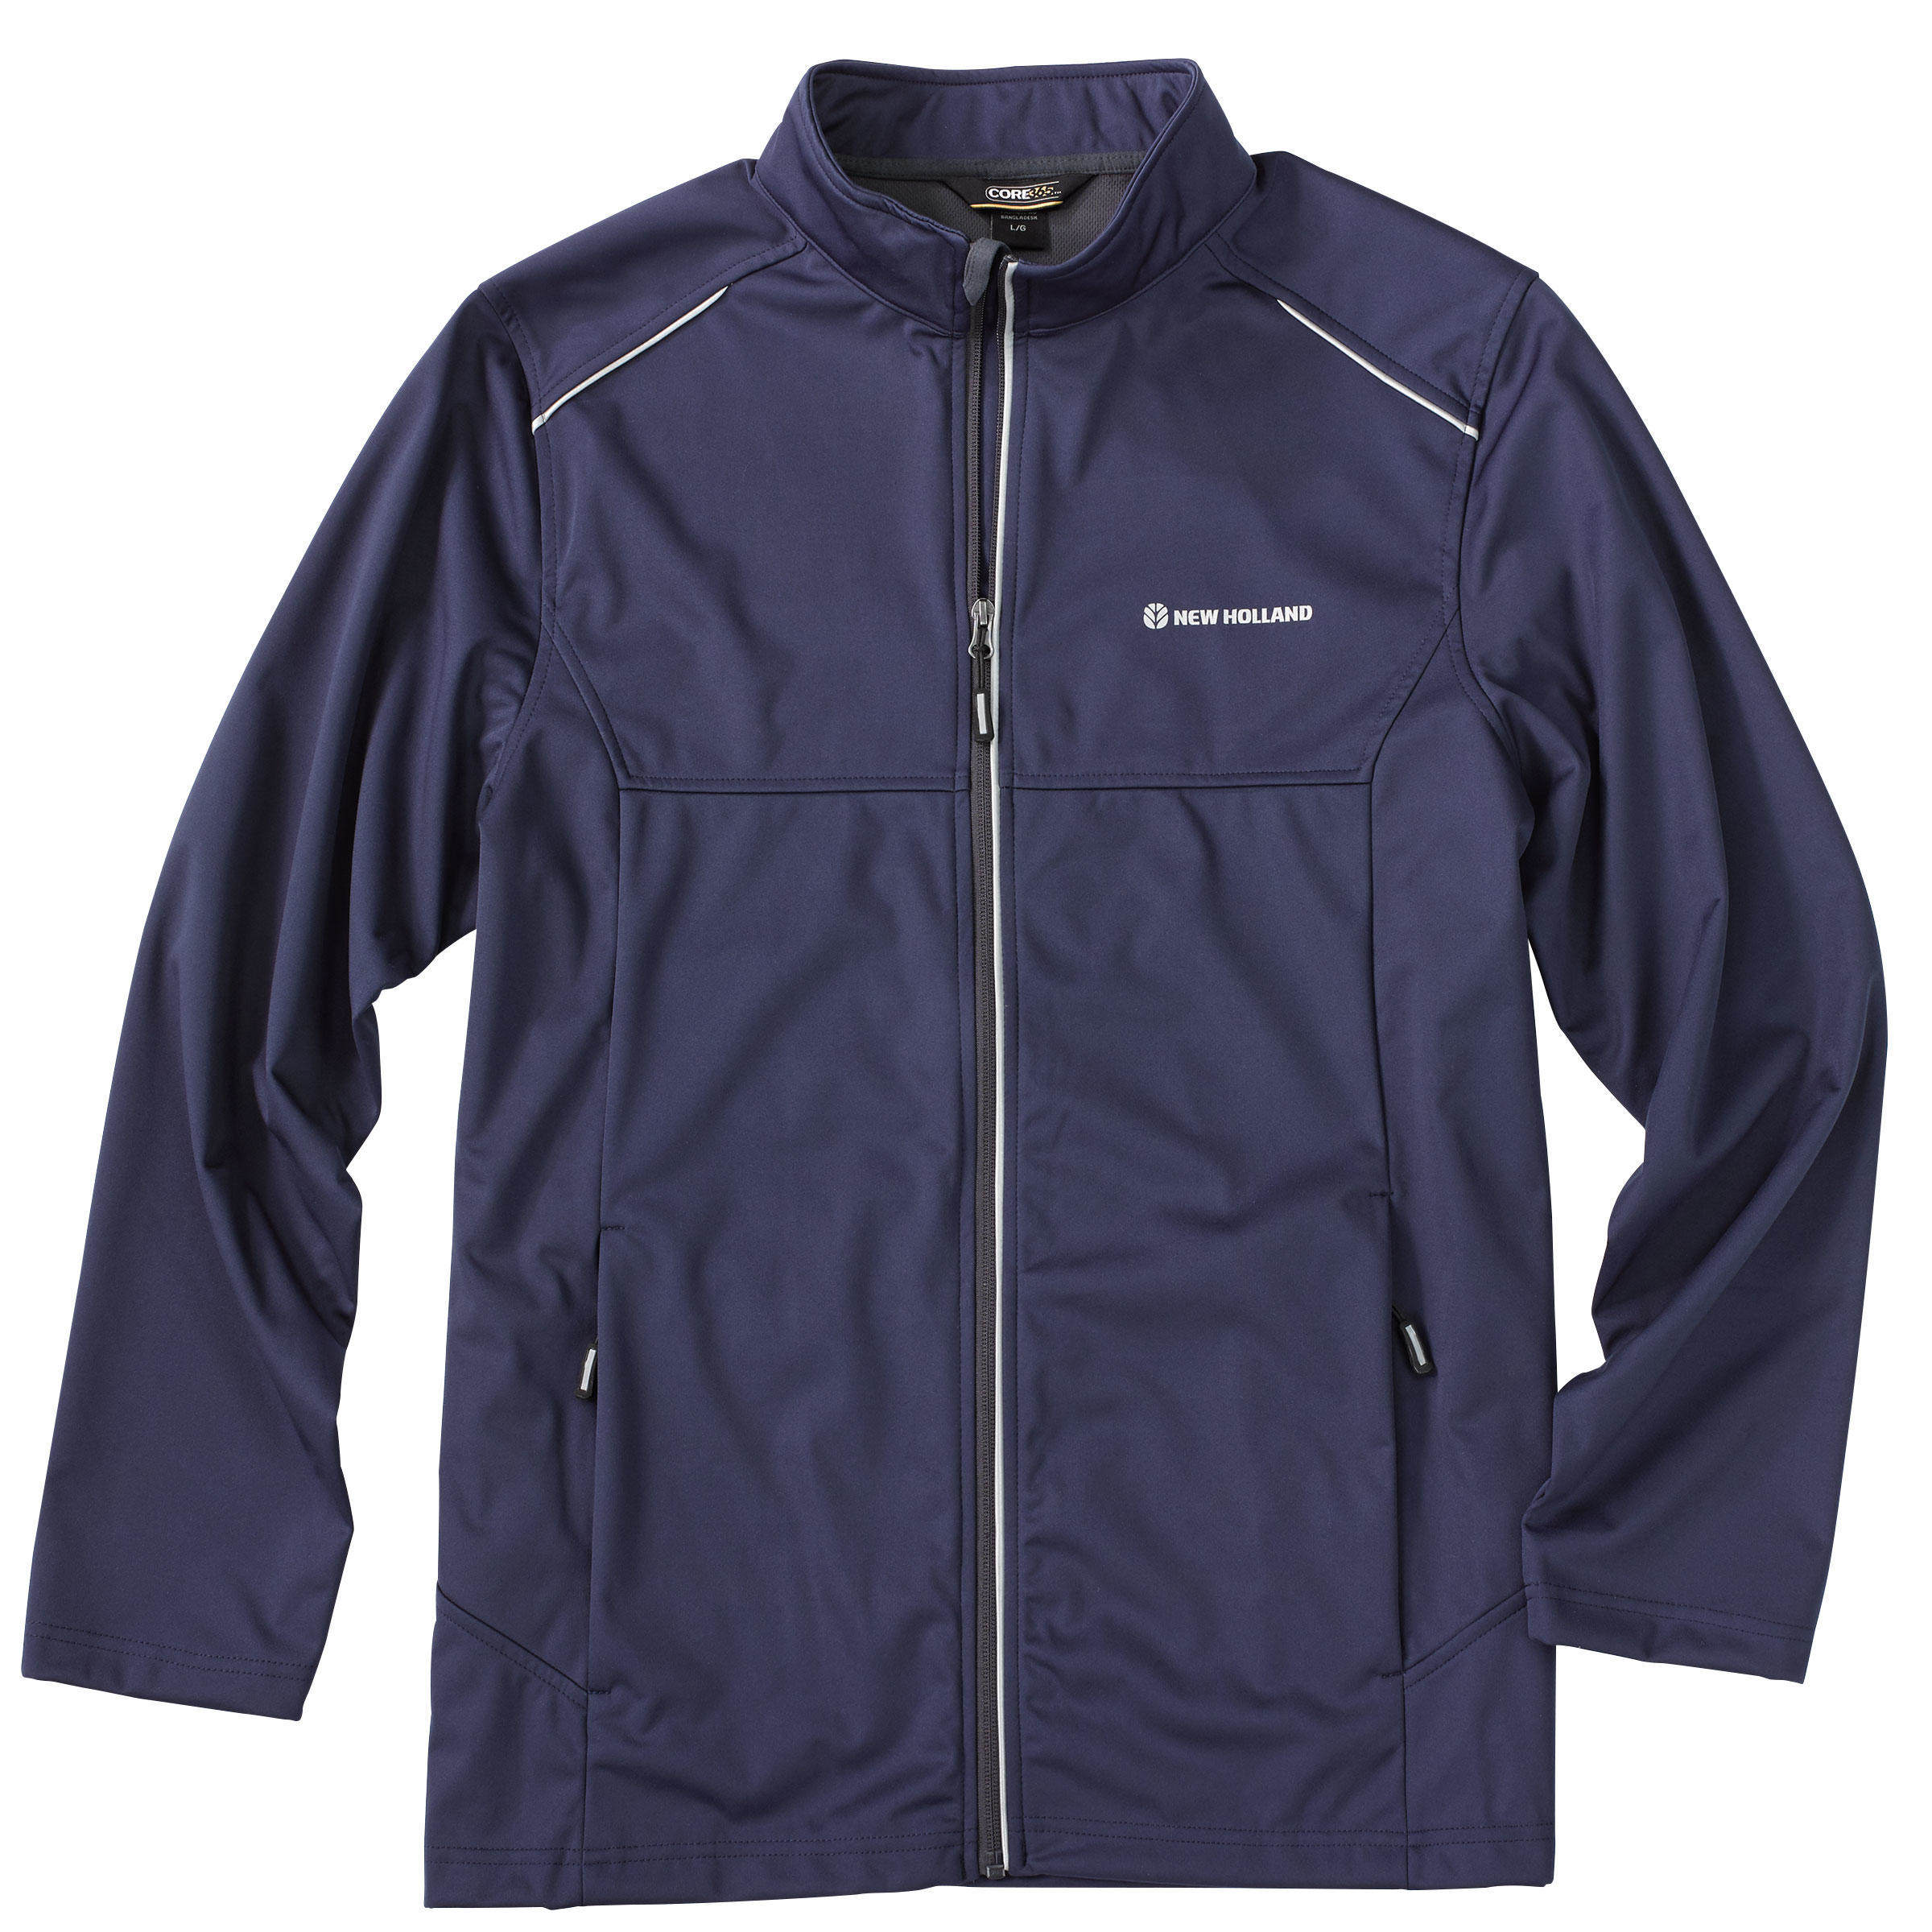 Apparel & Collectibles #322917 New Holland Lite Shell Jacket